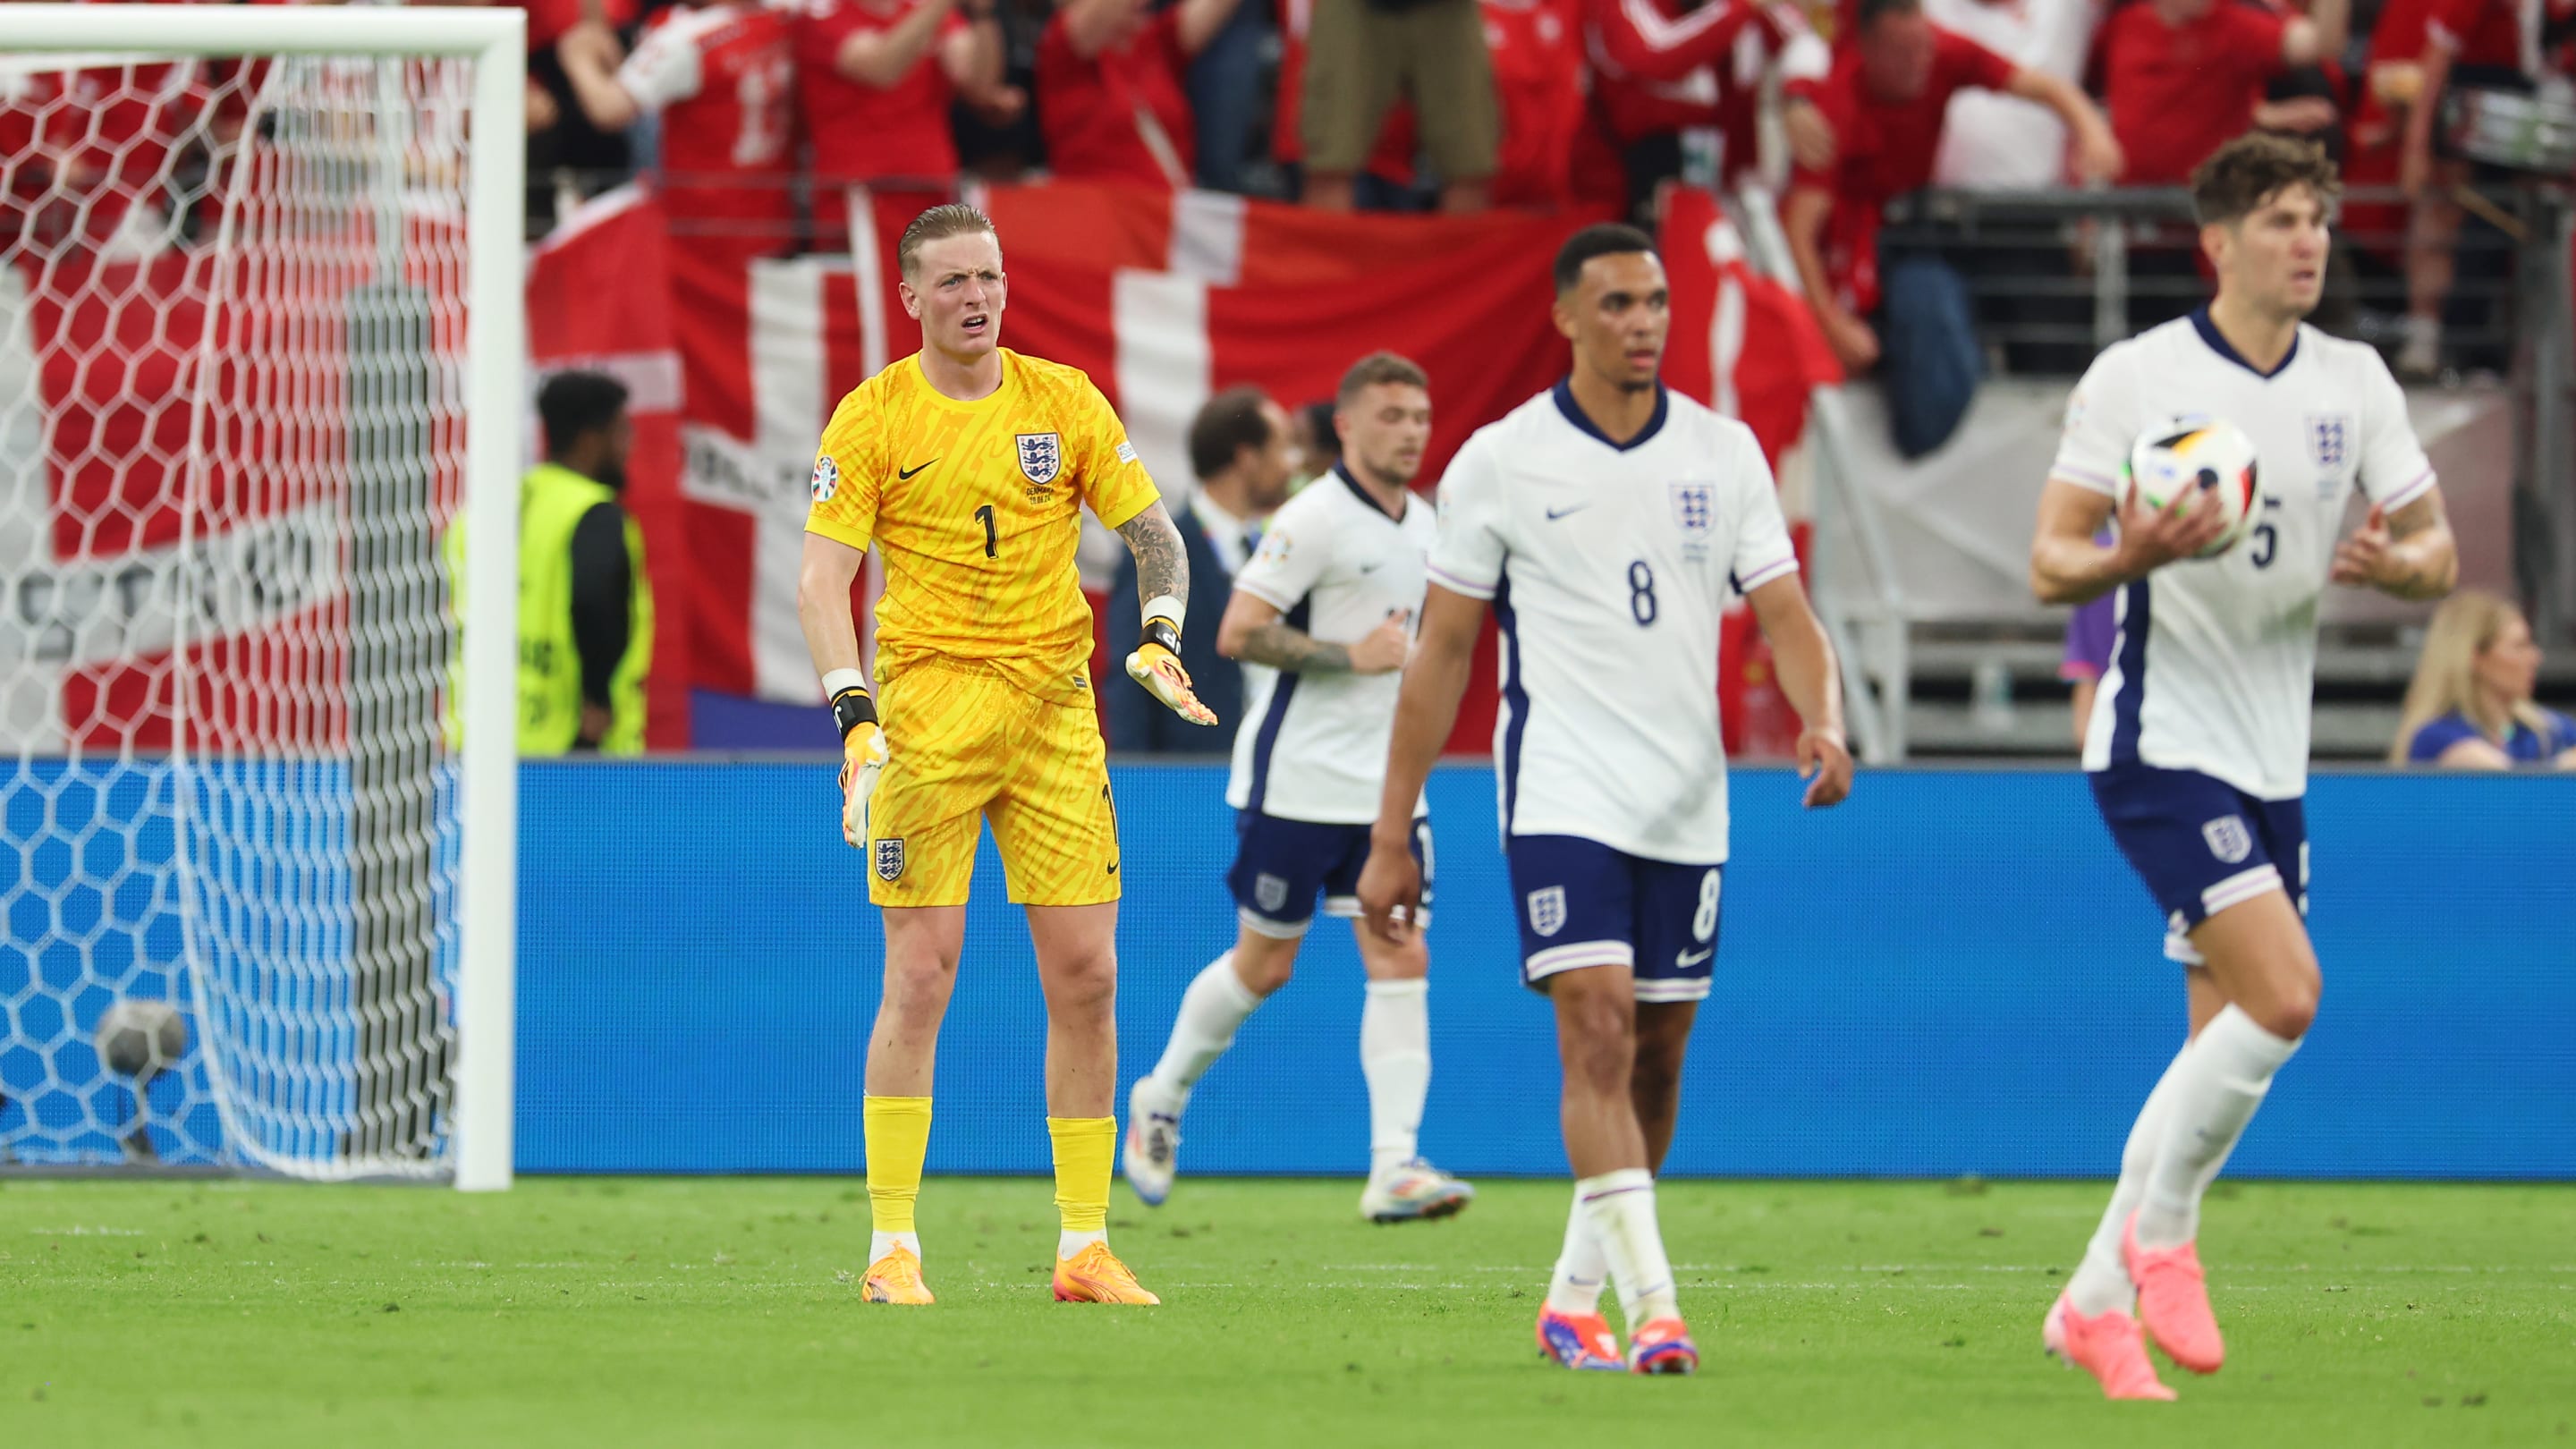 Denmark 1-1 England: Player ratings as sloppy Three Lions blow chance to qualify for knockouts